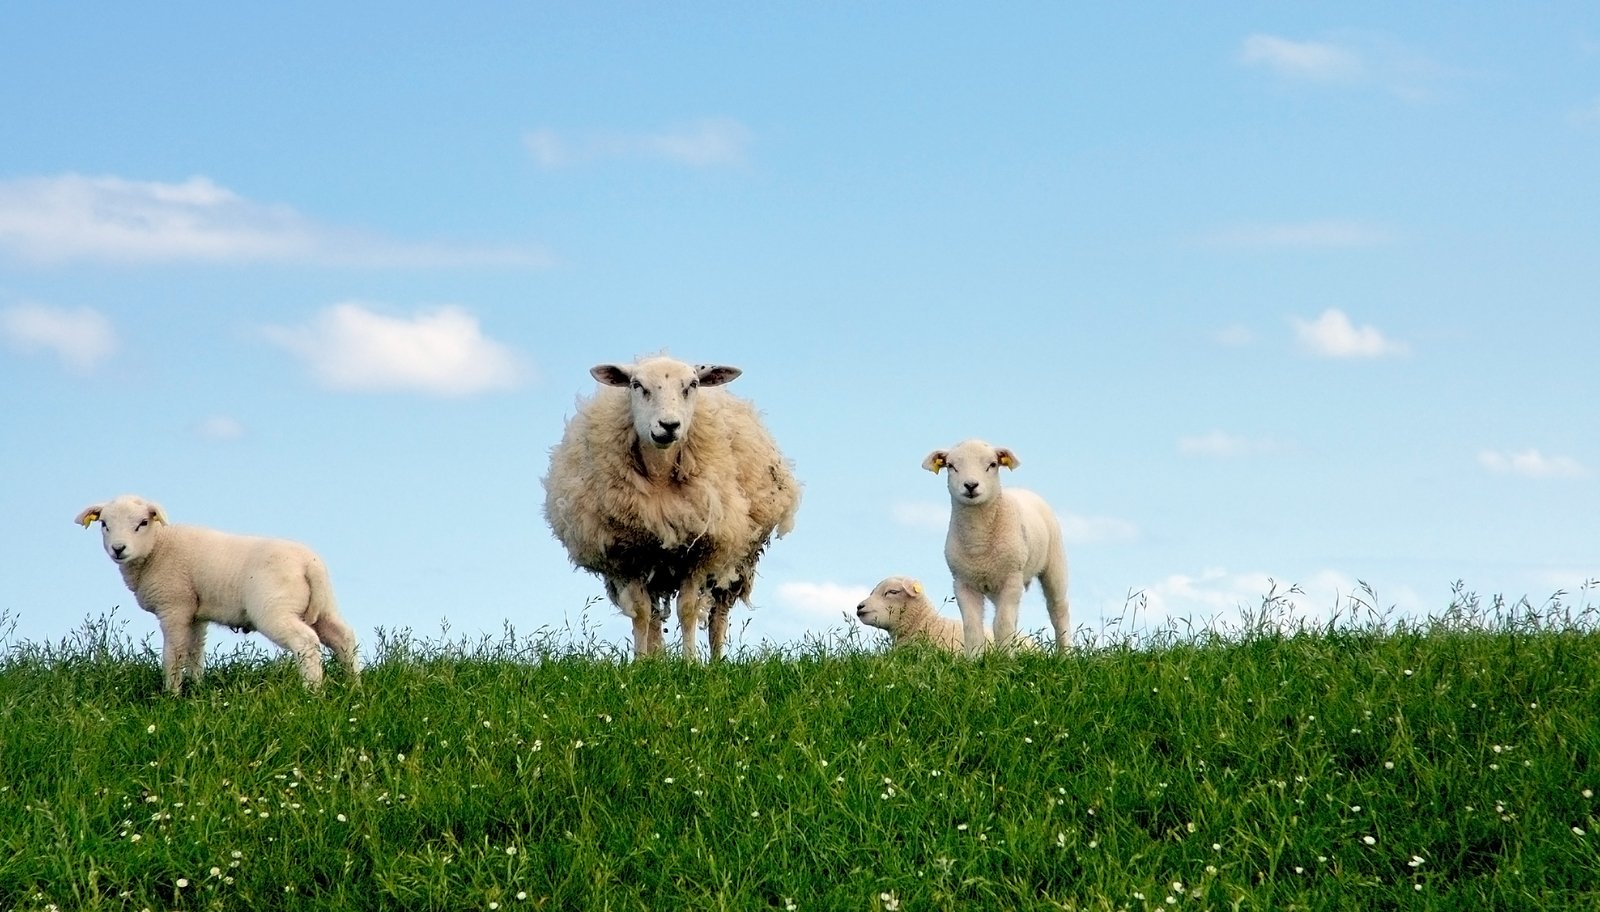 four sheep standing on a grassy hillside together